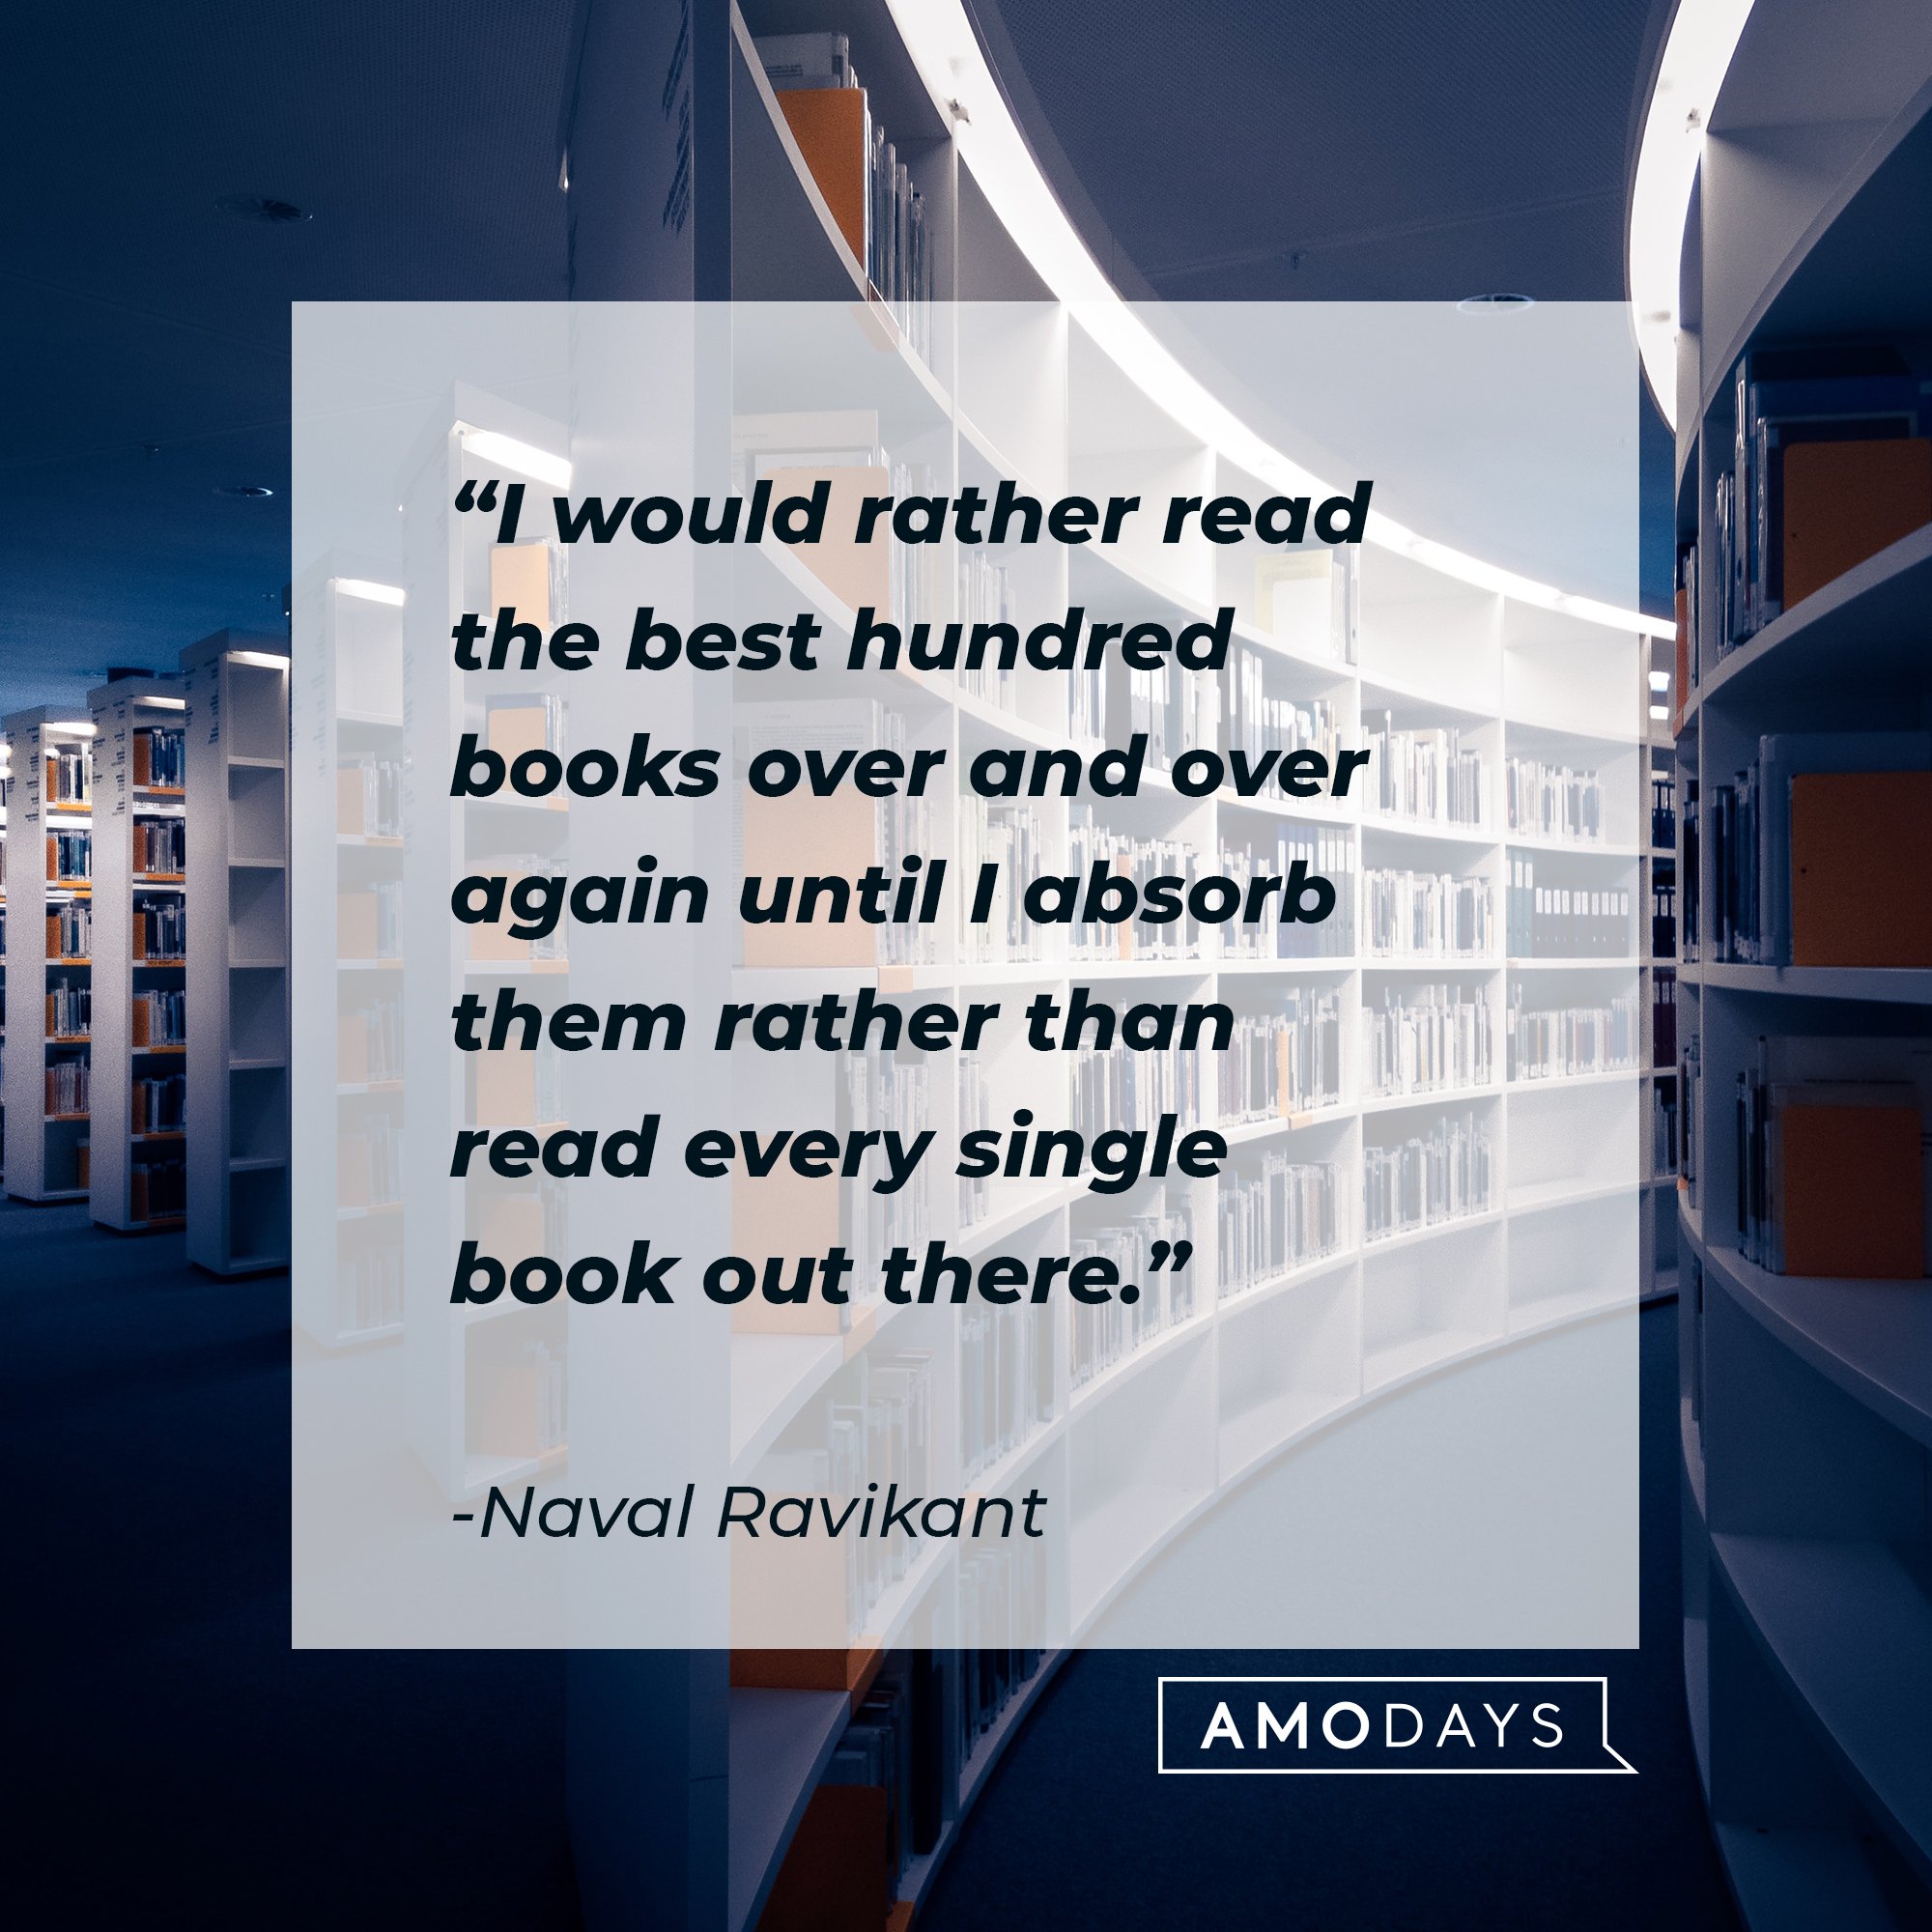  Naval Ravikant's quote: "I would rather read the best hundred books over and over again until I absorb them rather than read every single book out there." | Image: AmoDays